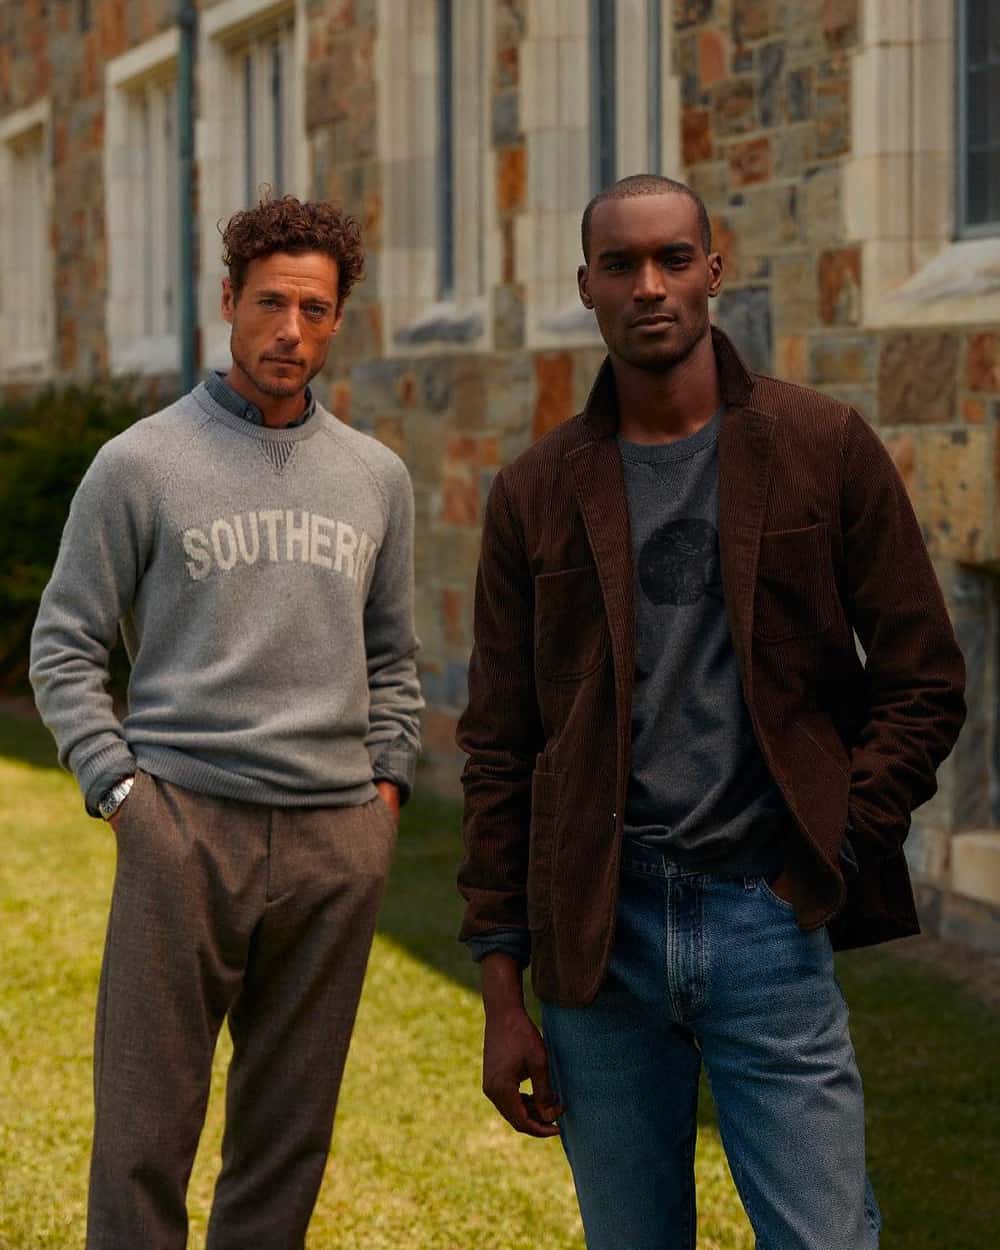 Two men wearing Billy Reid preppy clothing. One in brown pants, chambray shirt and grey printed sweatshirt and the other in mid-wash jeans, charcoal T-shirt and brown sports coat